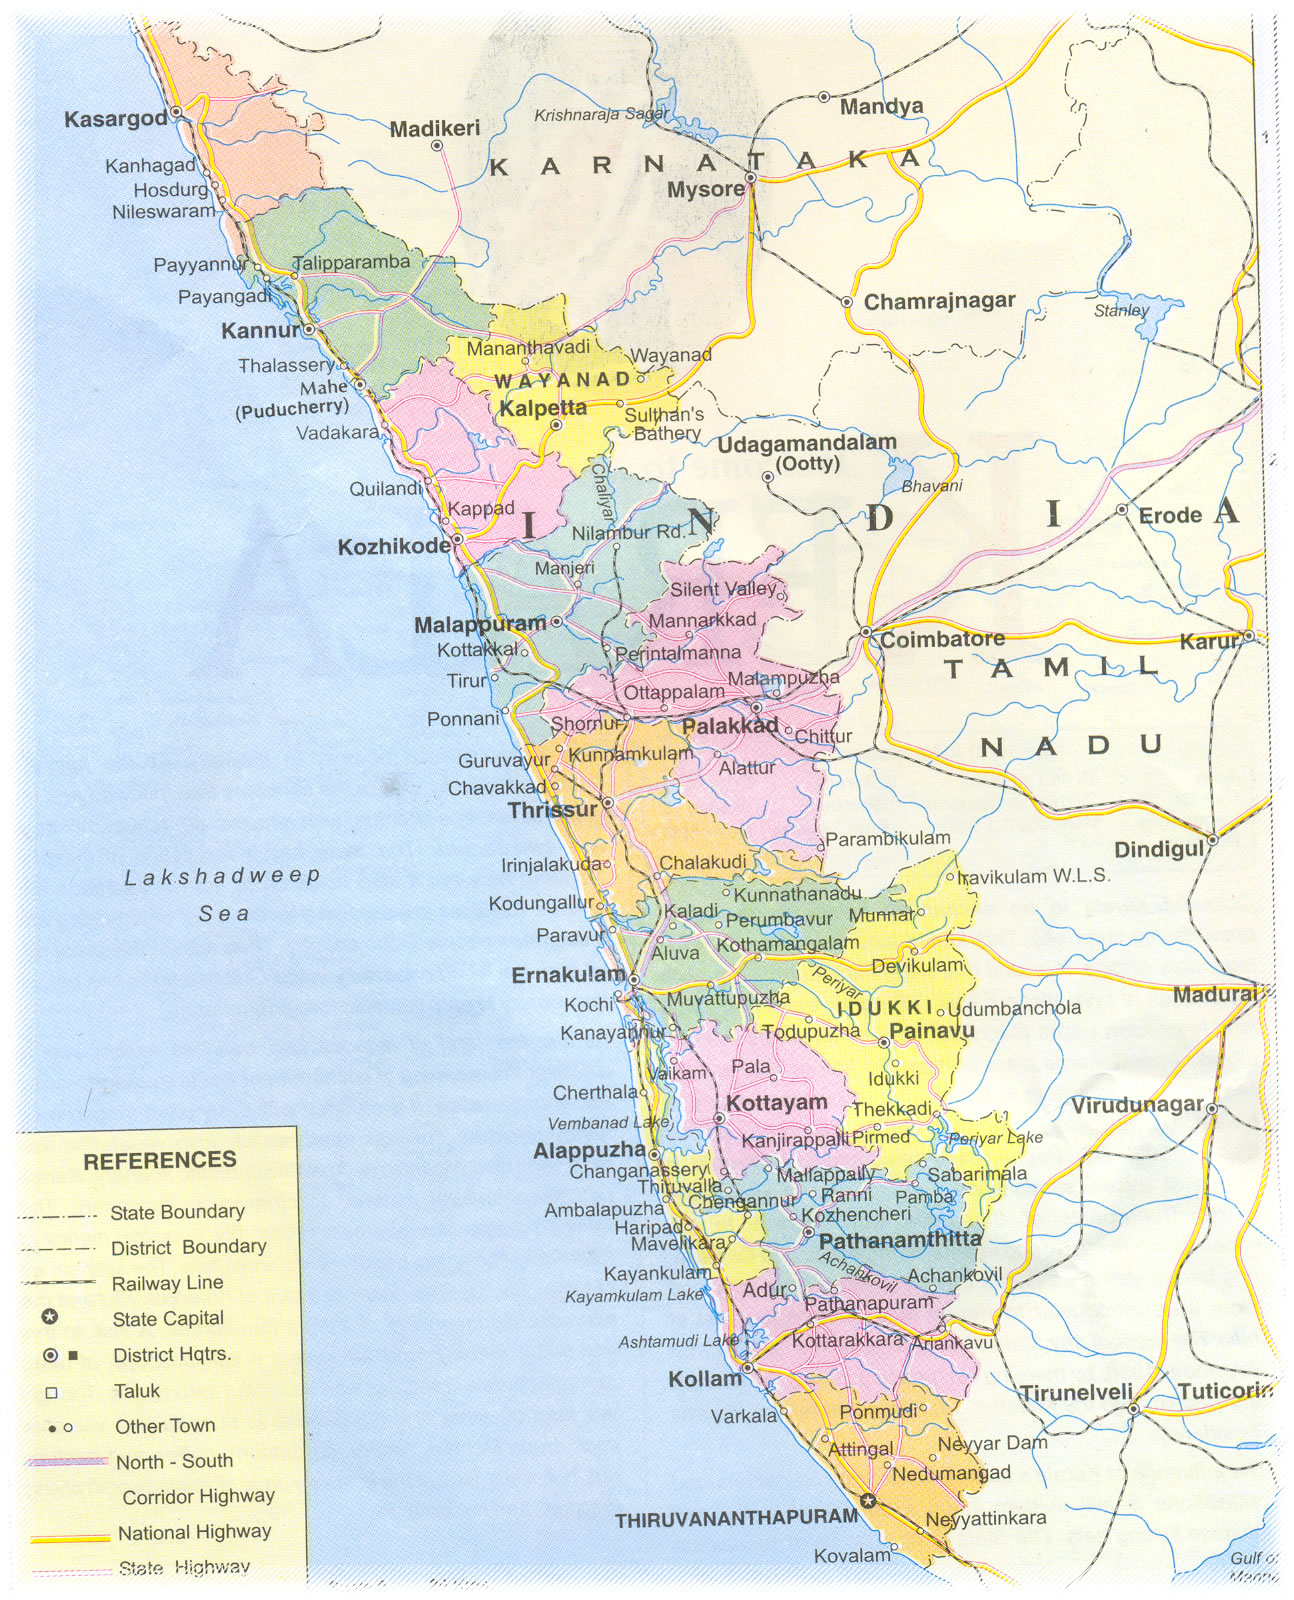 Very Old and Rare Photos, Pictures of Kerala, India: kerala political map